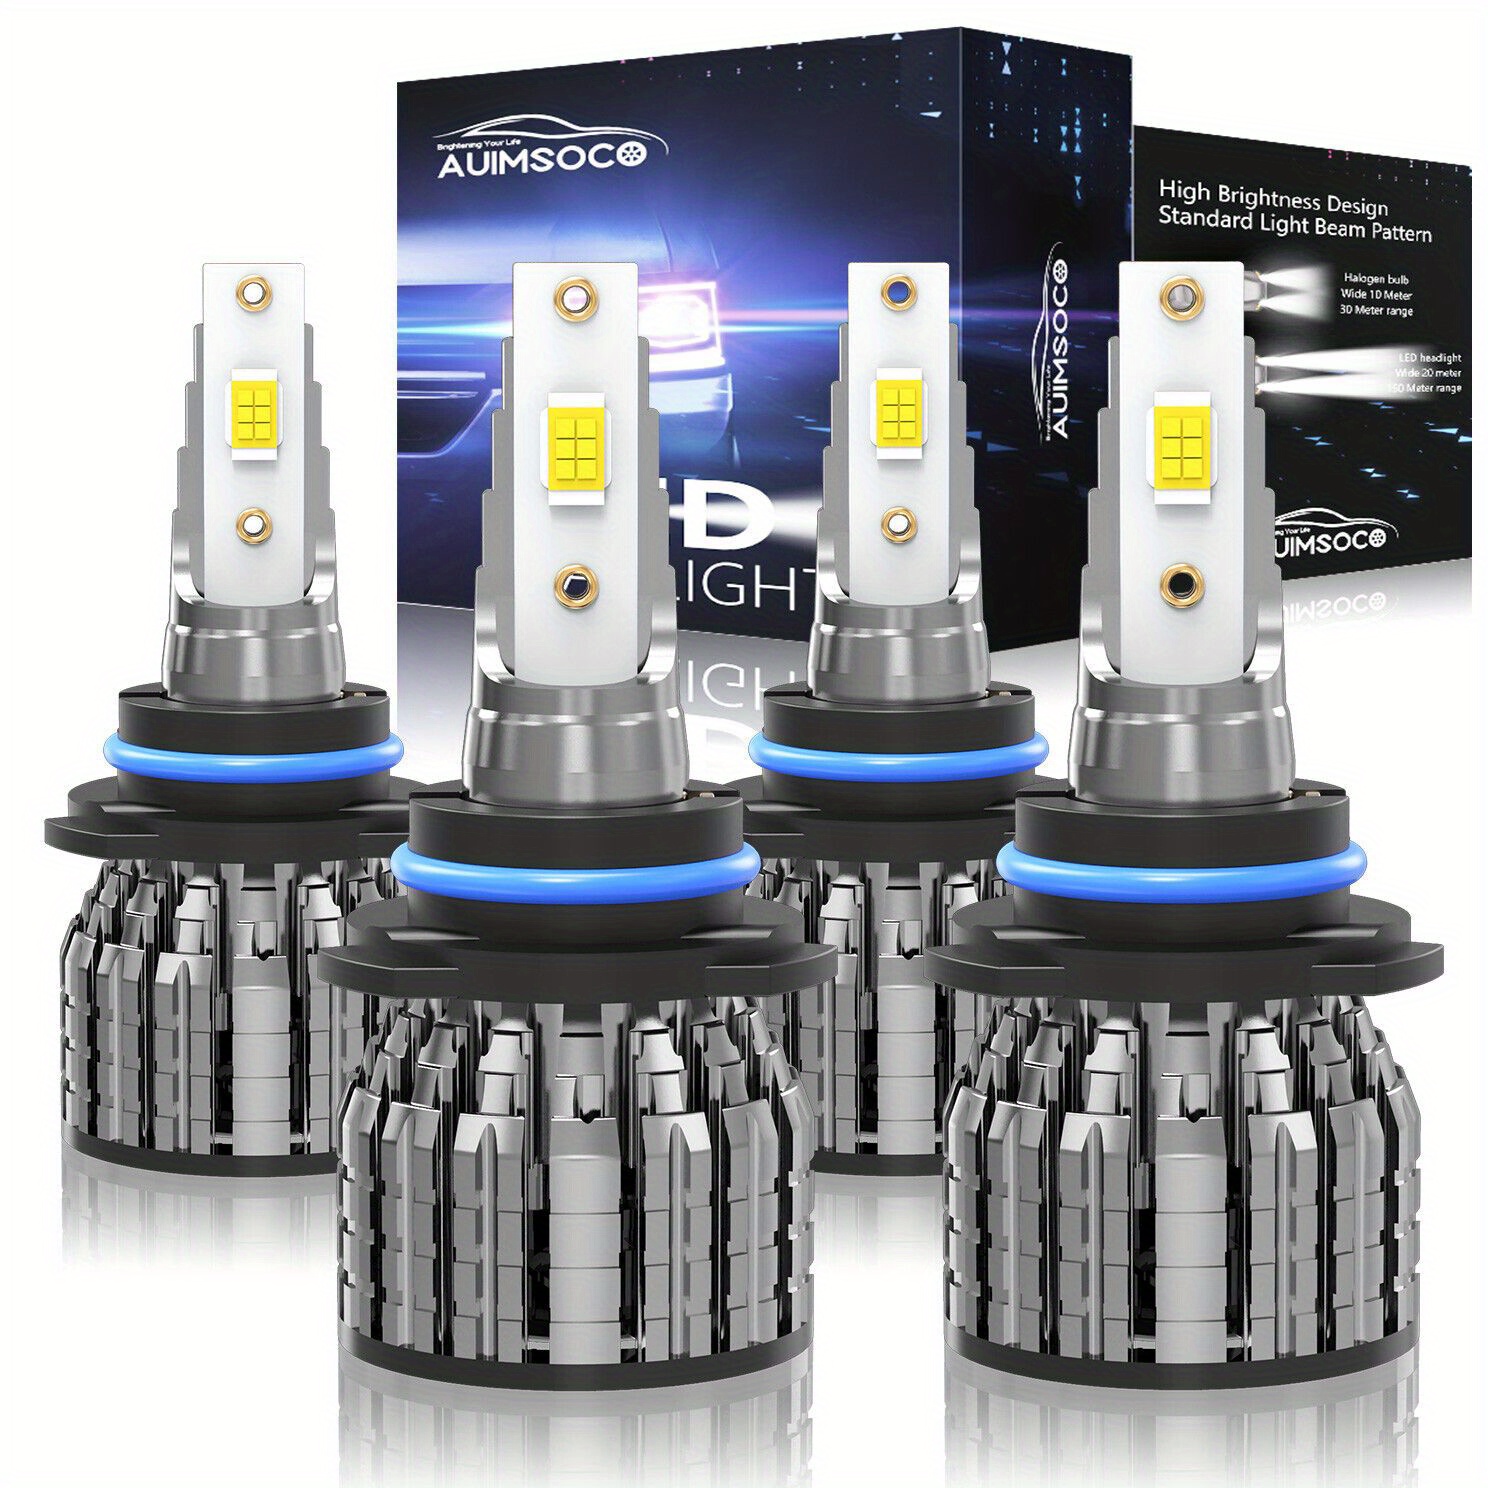 

For Honda Civic (2006-2015) Led Headlight Bulbs, 9005/hb3 + 9006/hb4 Low Beams Light Bulbs Combo, 6500k Bright White, 300% Ultra Brighter, Plug And Play, Pack Of 4